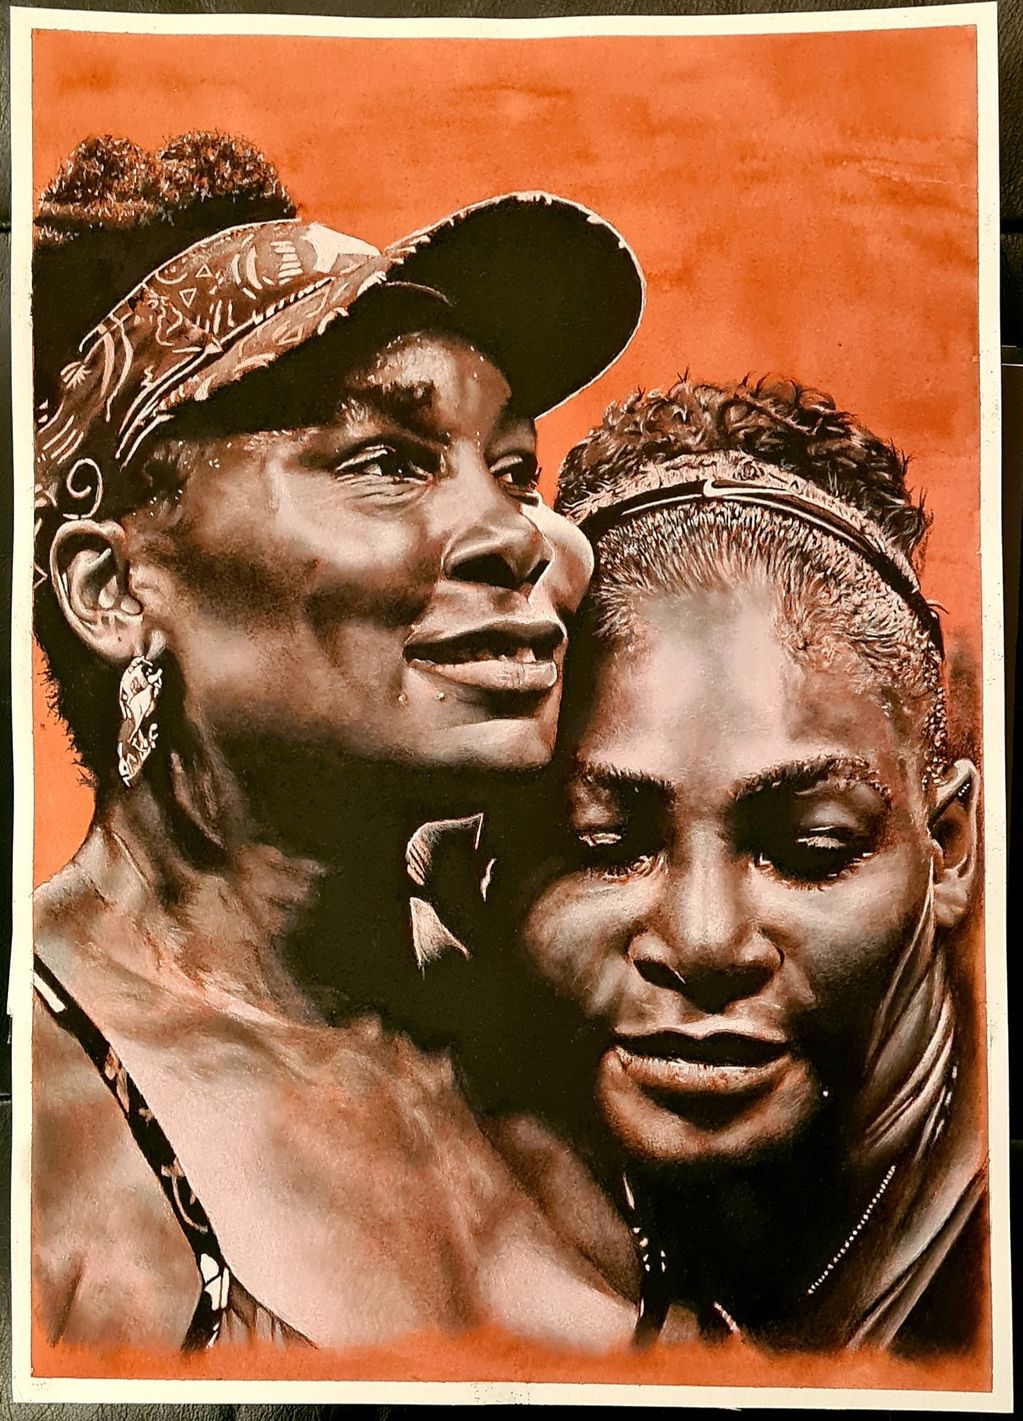 Mixed media drawing of Venus and Serena Williams. Ever since they burst onto the professional tennis